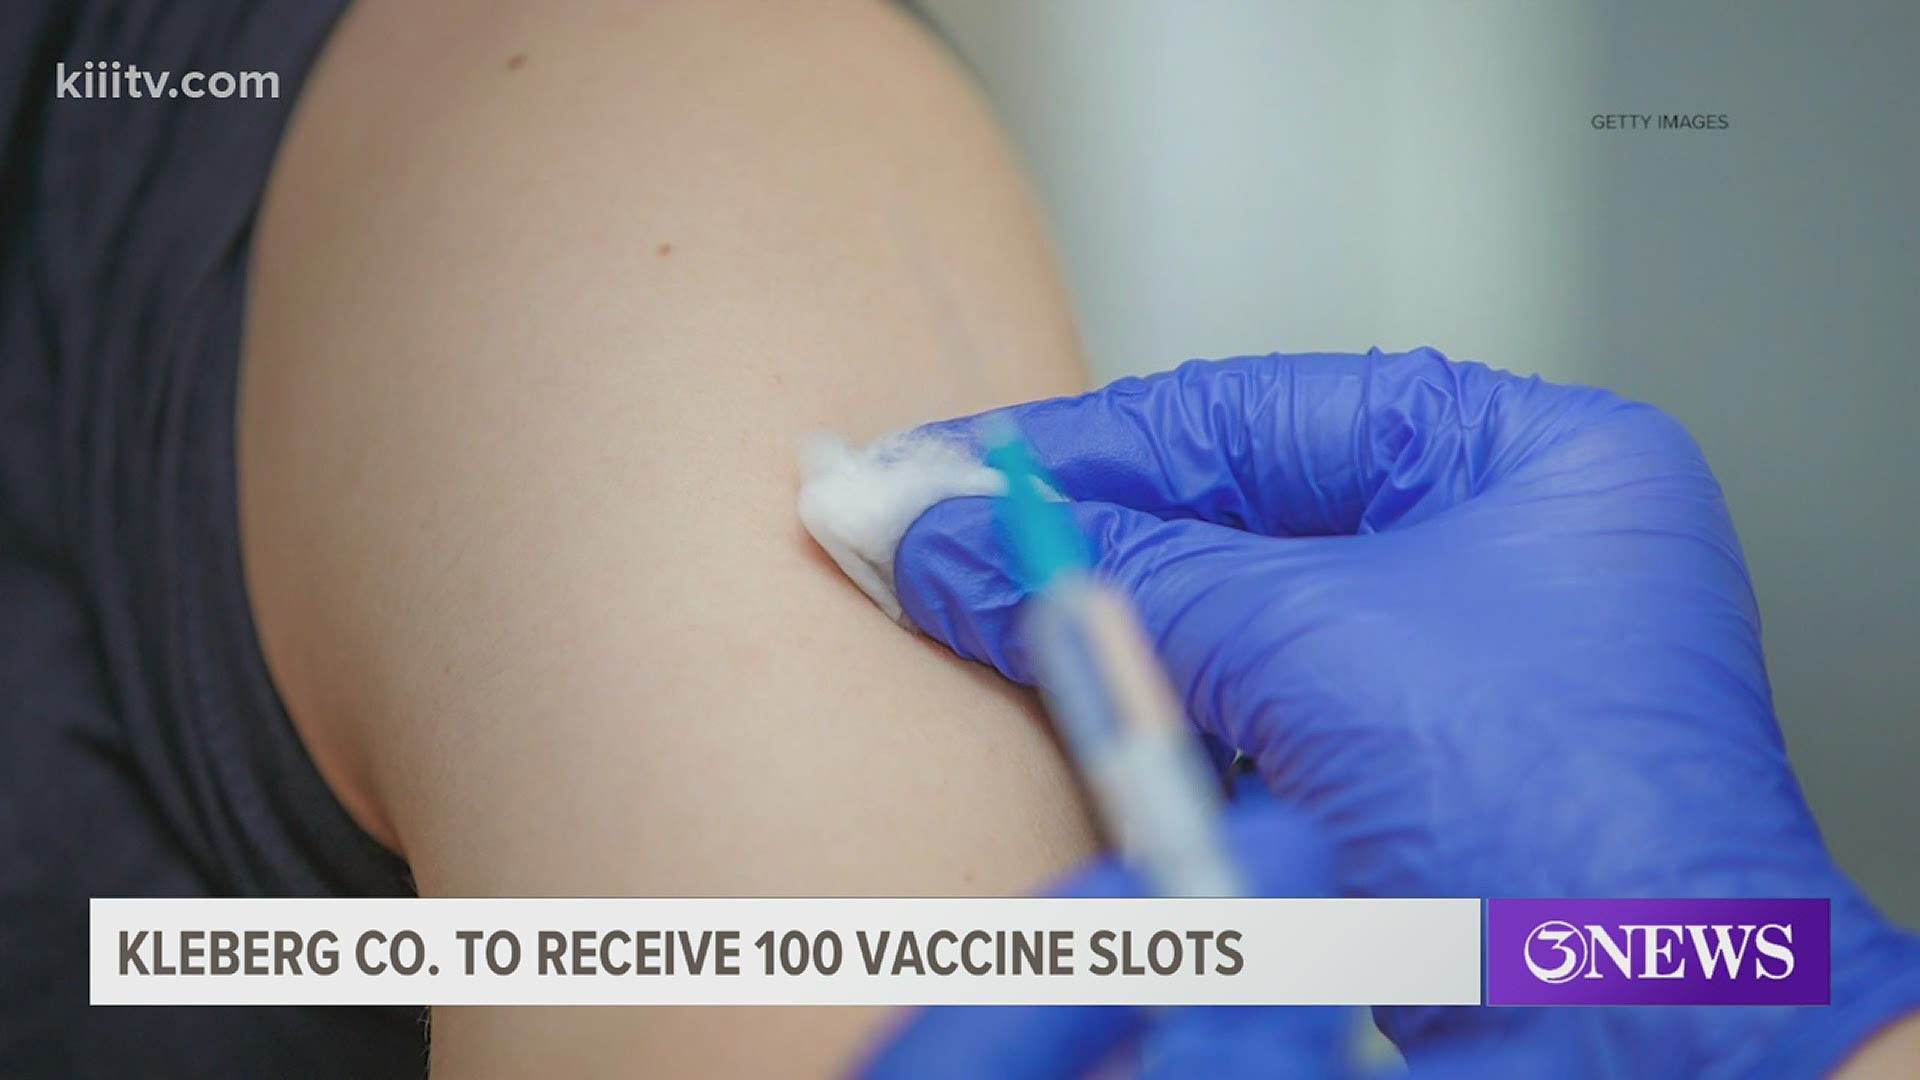 The County is also beginning a registry for those seeking the vaccine.